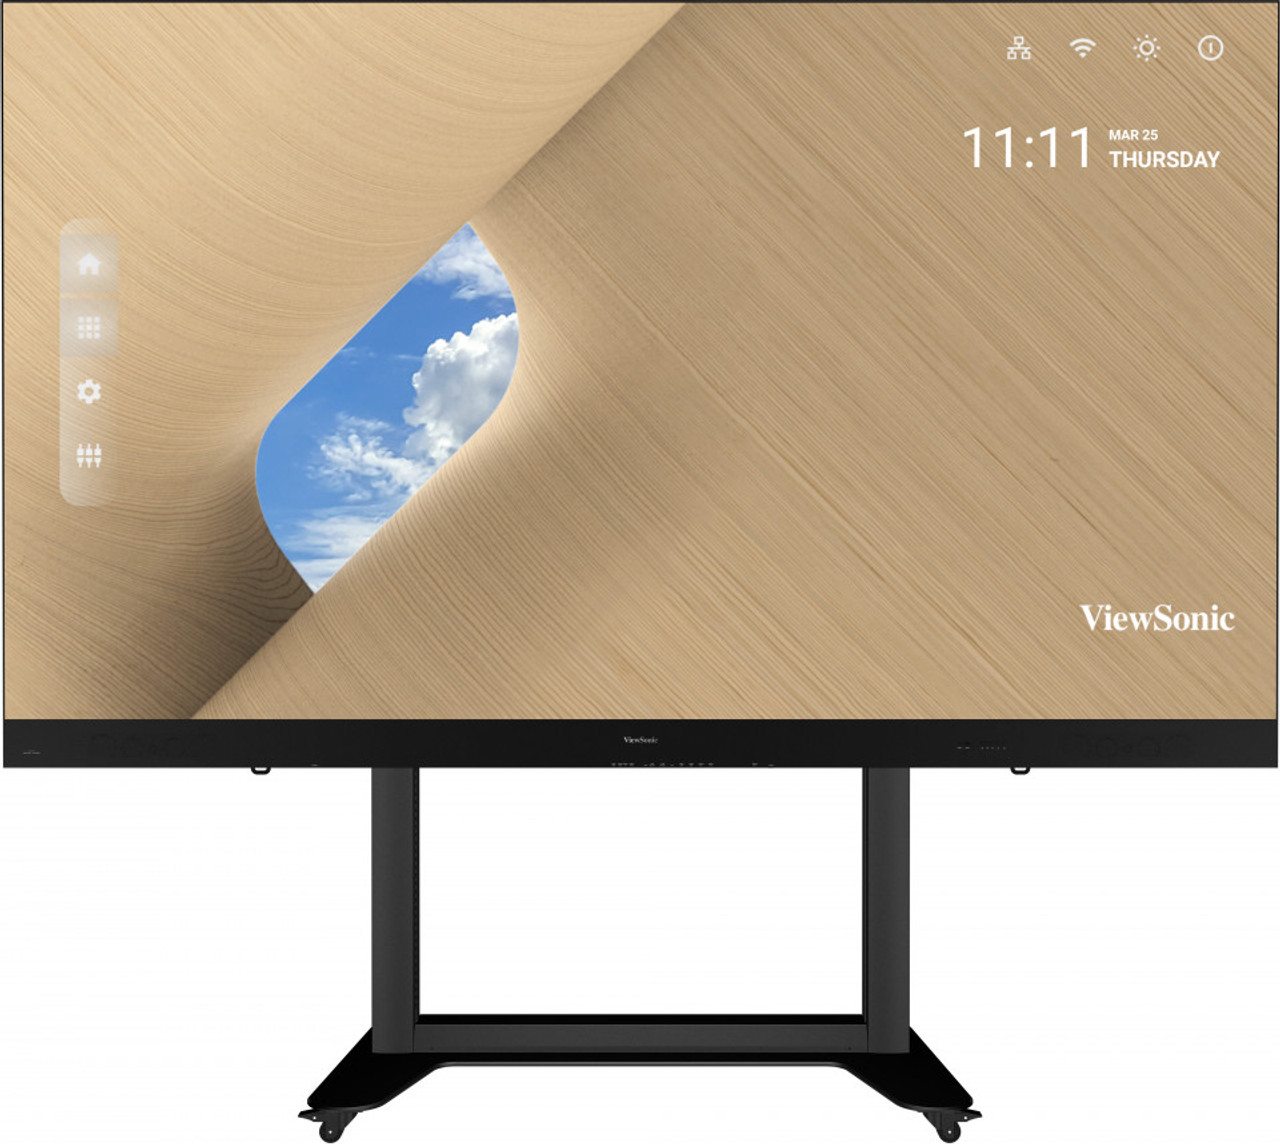 ViewSonic LDS-135-151 Foldable 135" 600 Nits 24/7 All-in-One Direct View LED Display with Flight Case